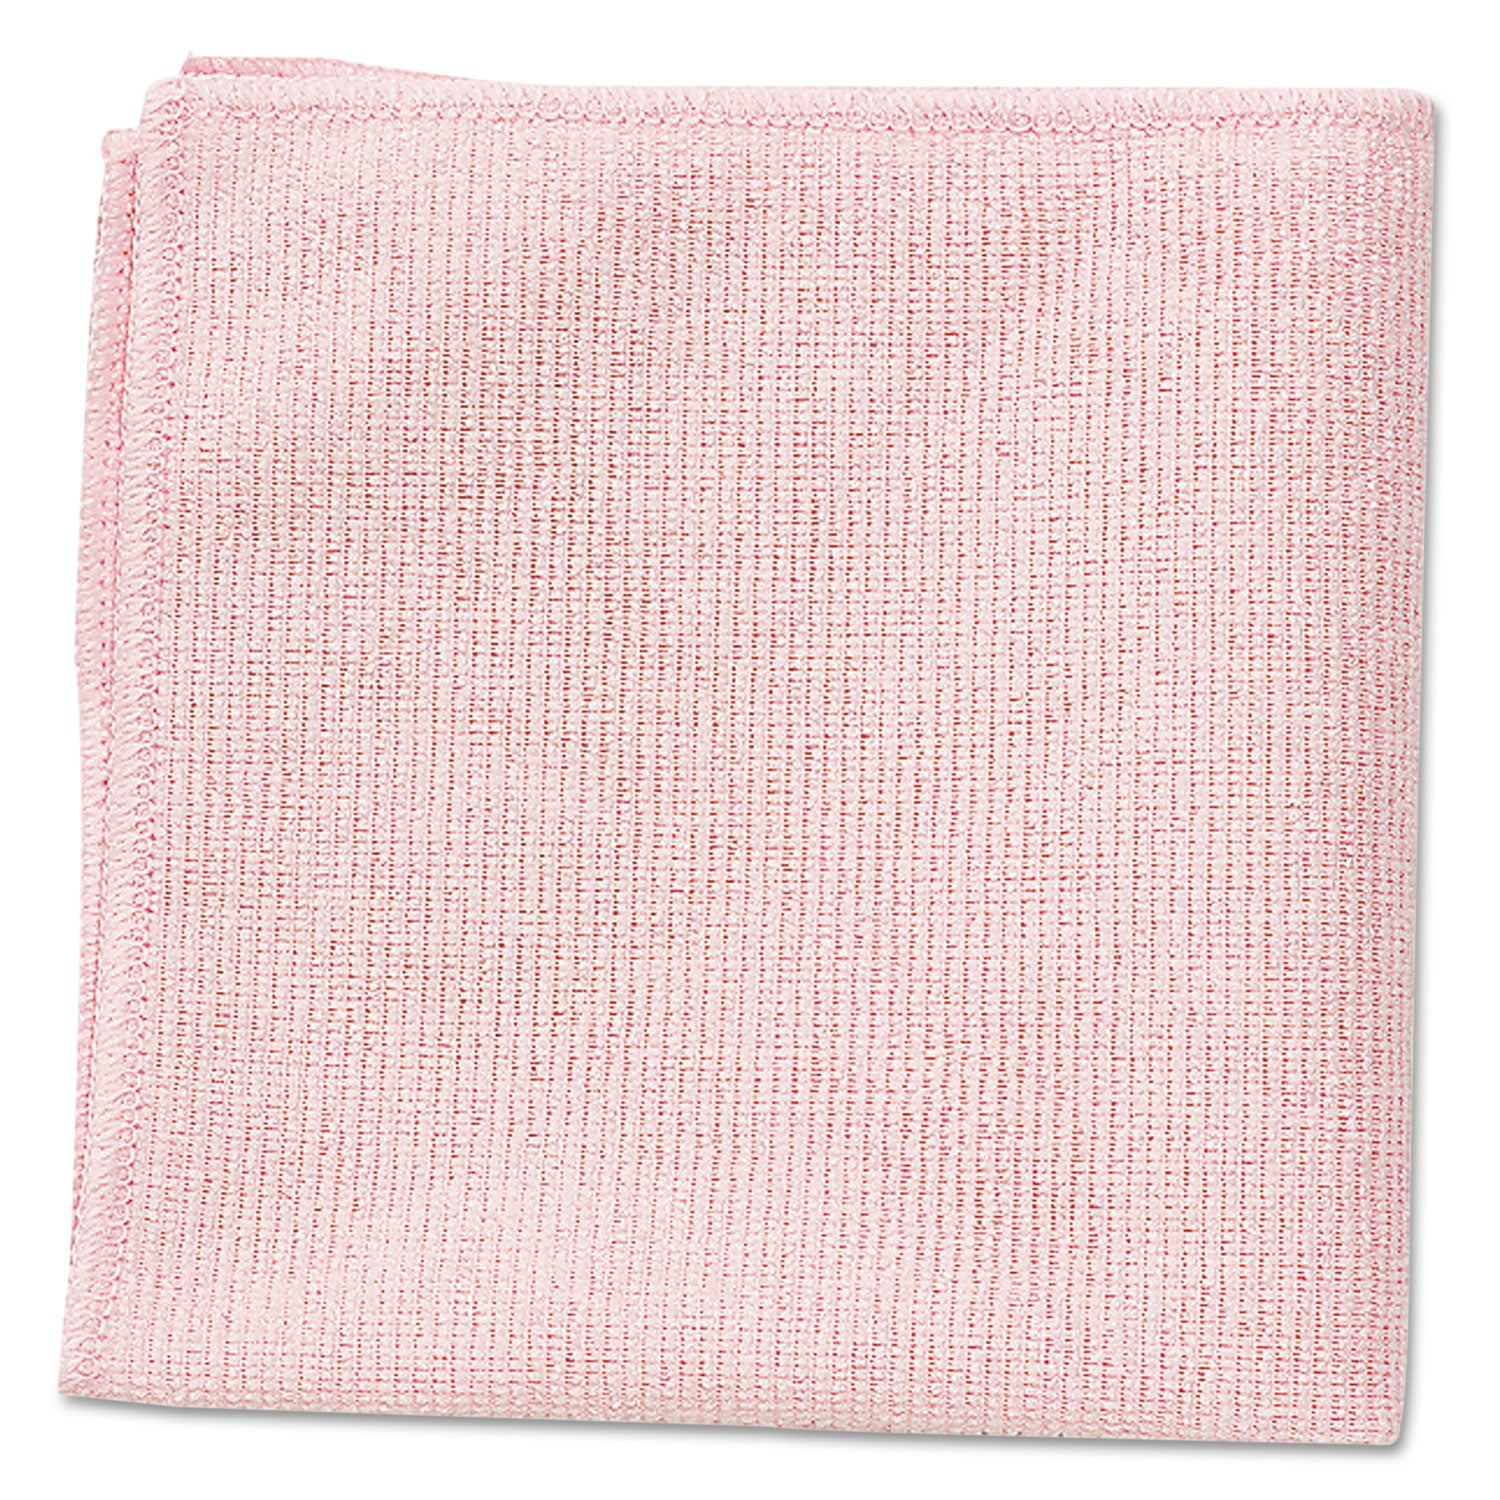 Microfiber Cleaning Cloths, 16 x 16, Pink, 24/Pack - 